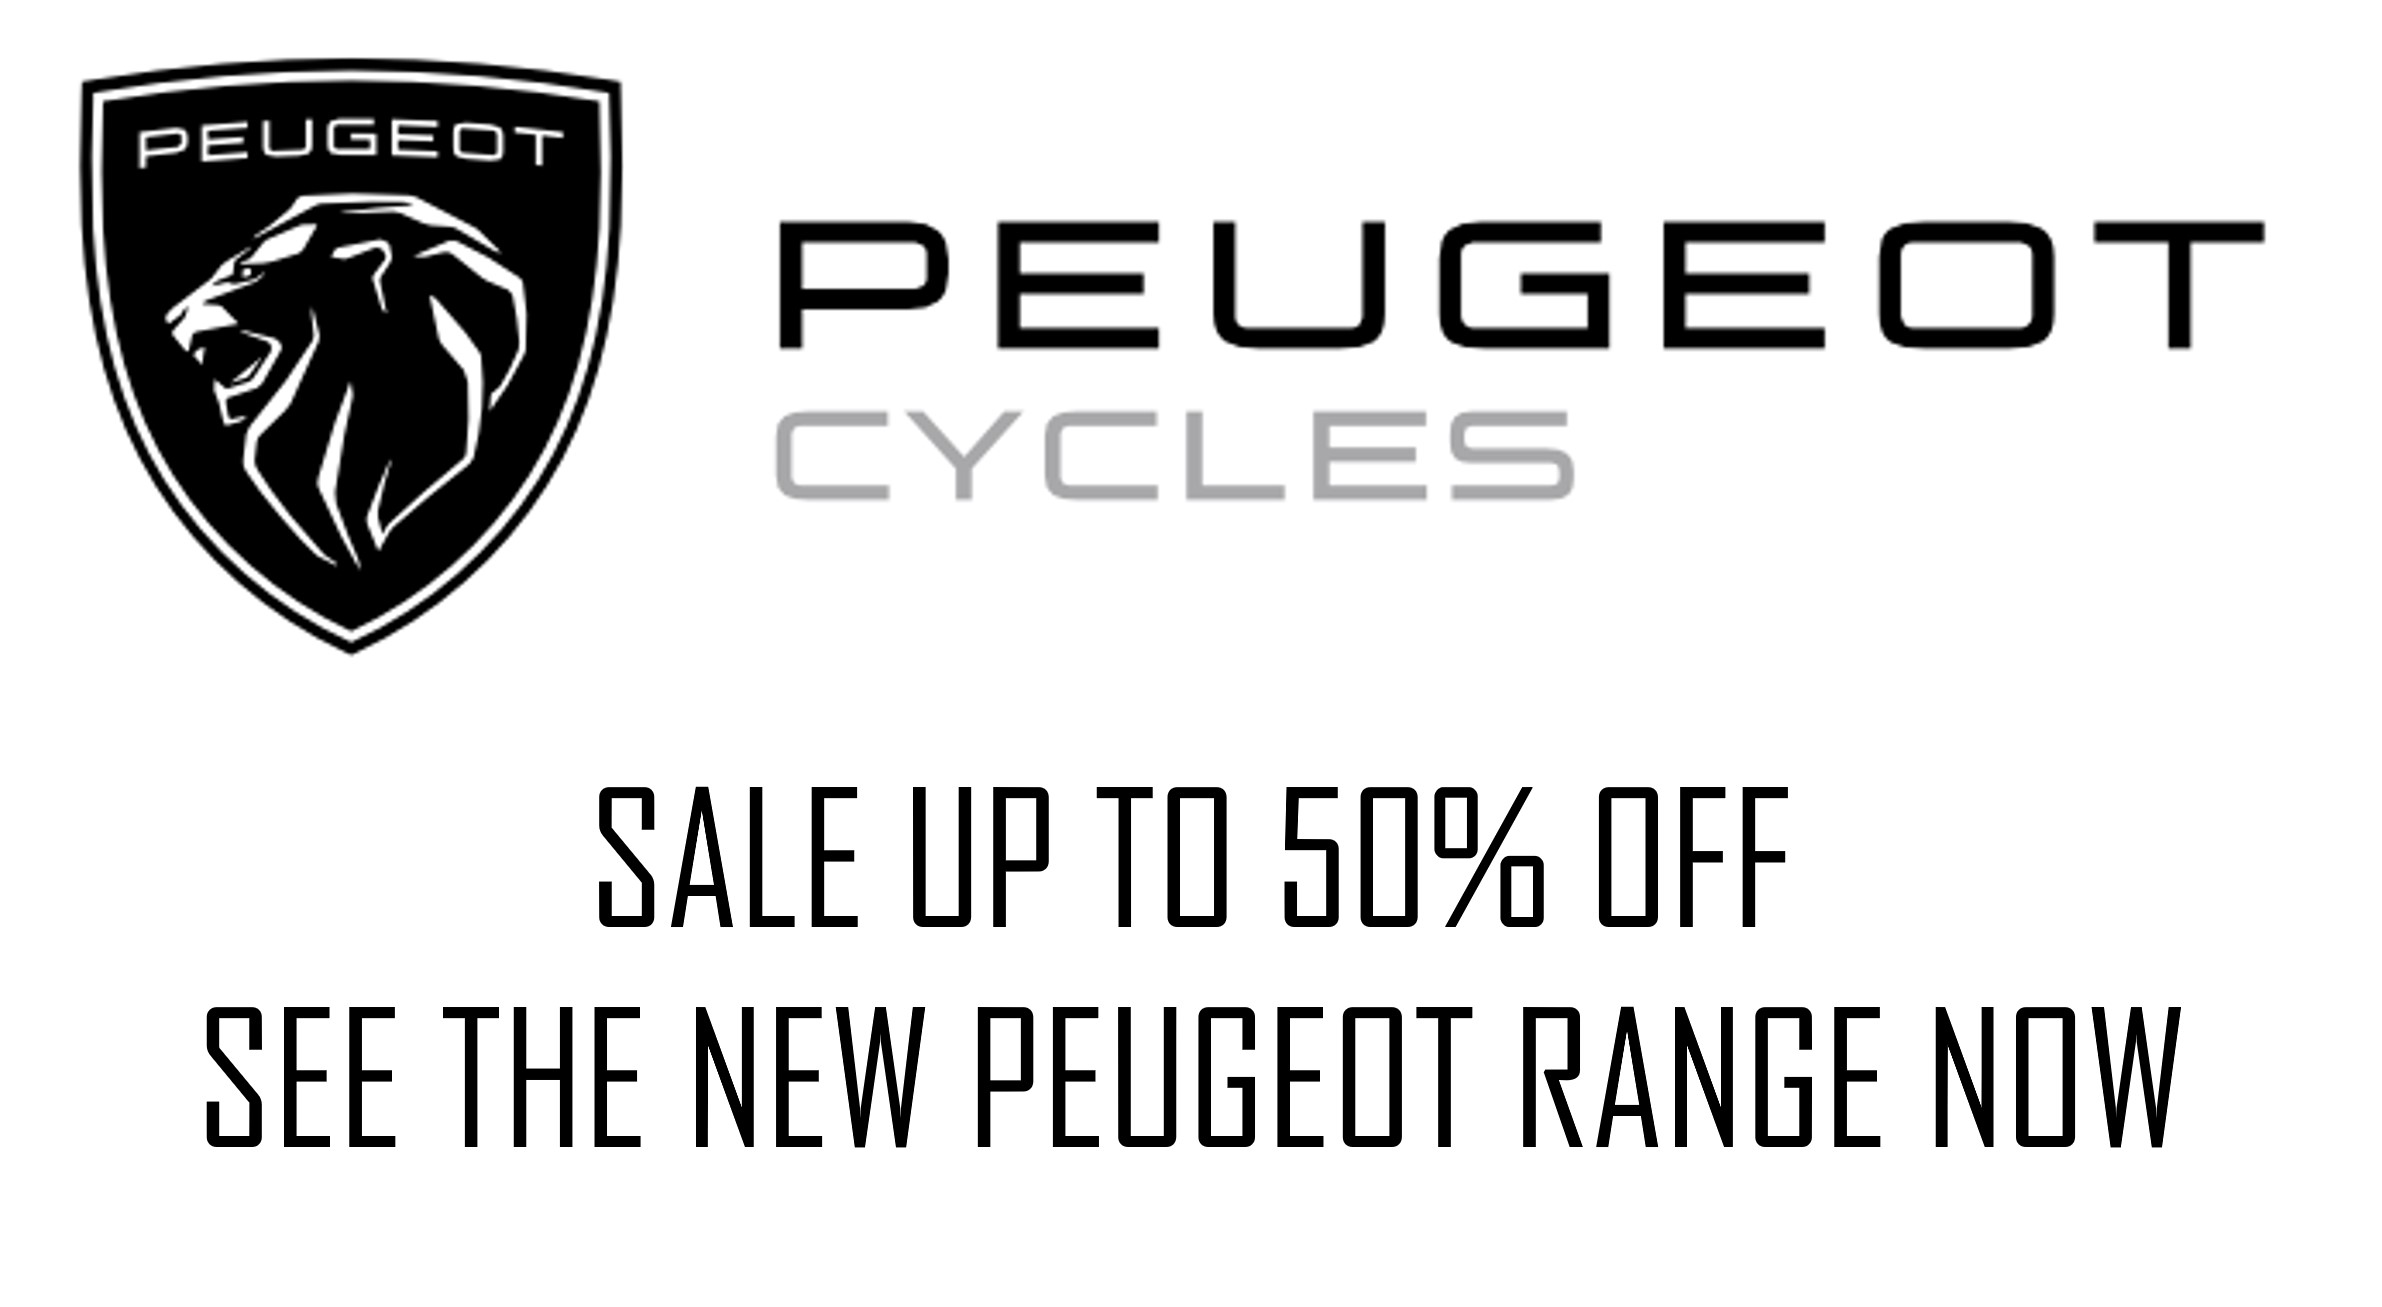 New Peugeot Cycles | Up to 50% off